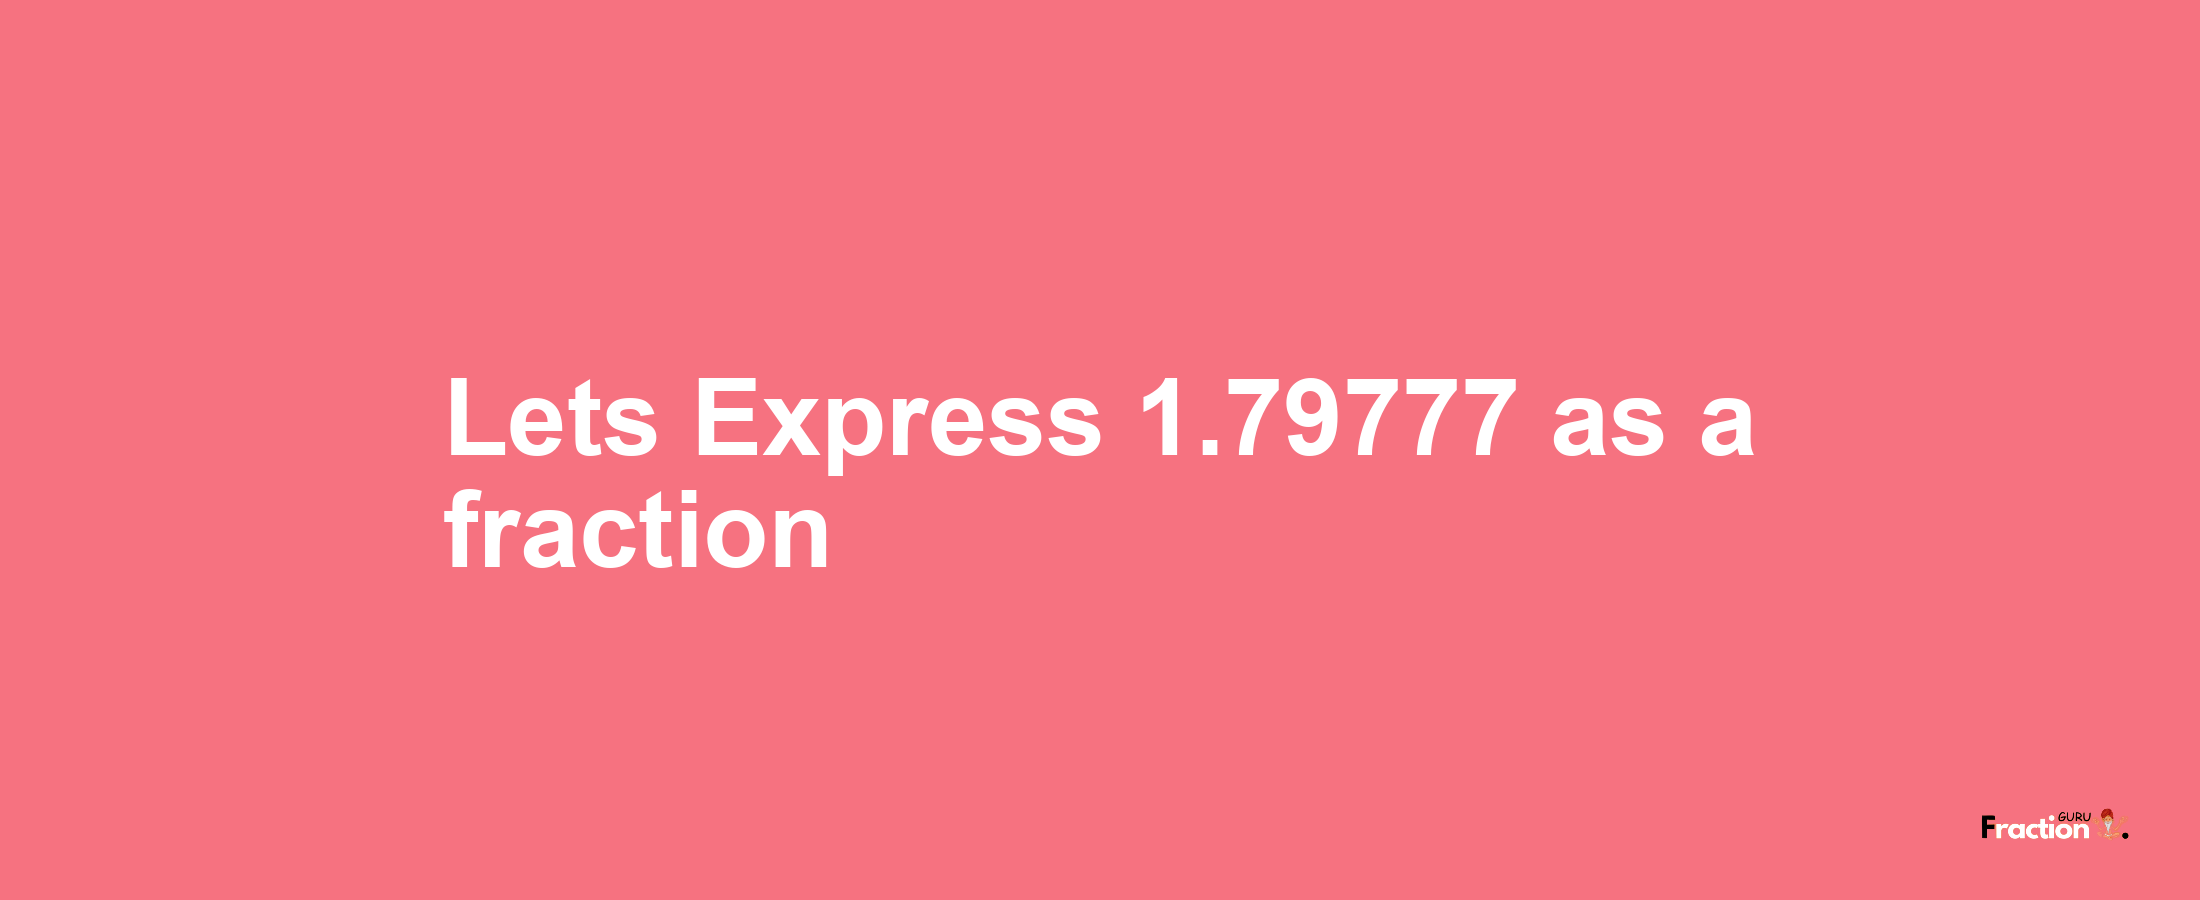 Lets Express 1.79777 as afraction